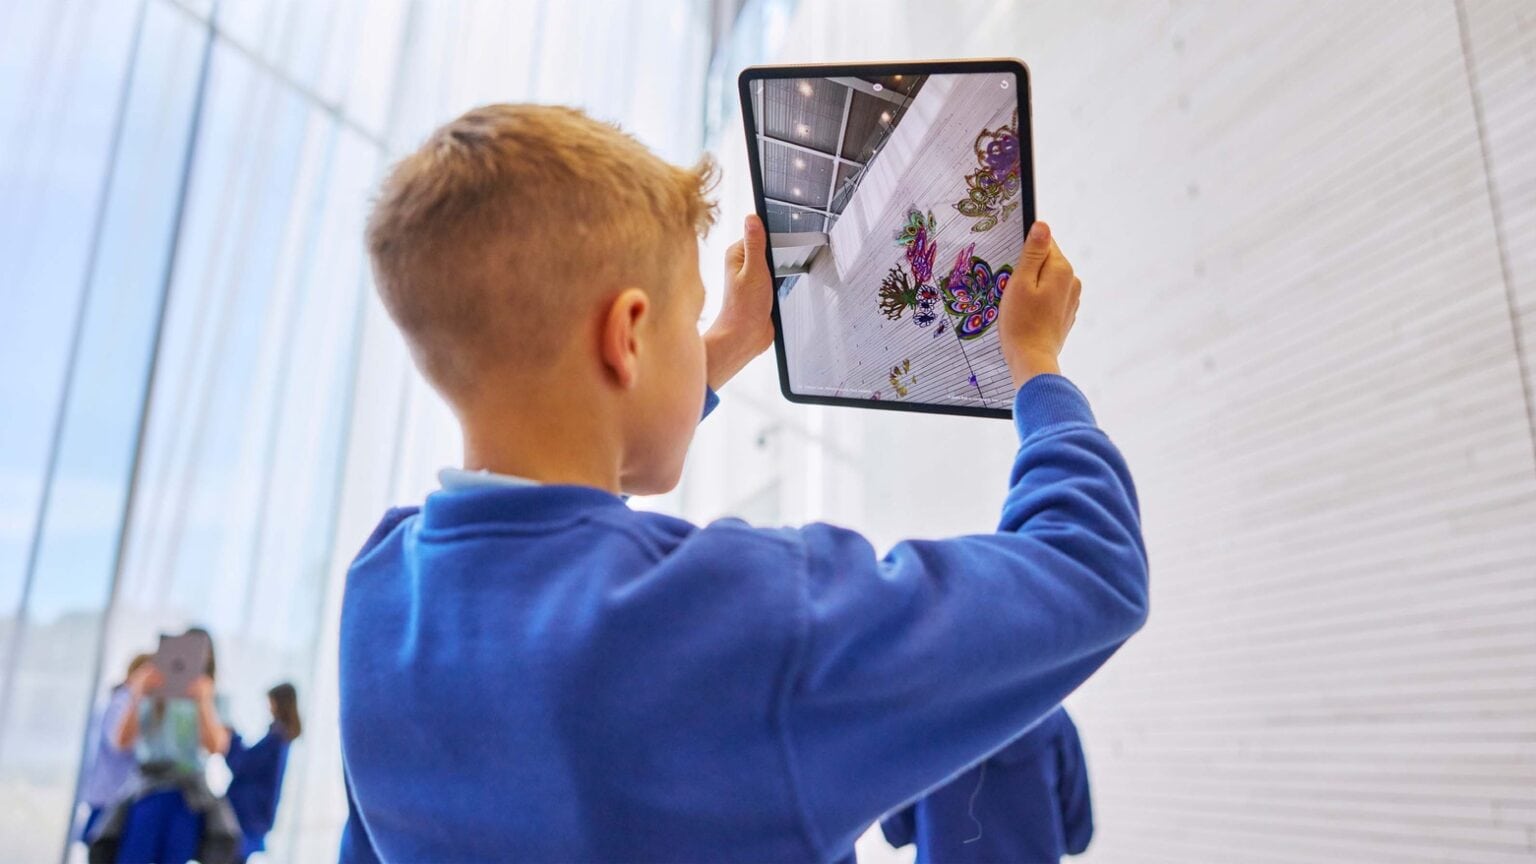 Apple reminds us that iPad Pro does augmented reality too